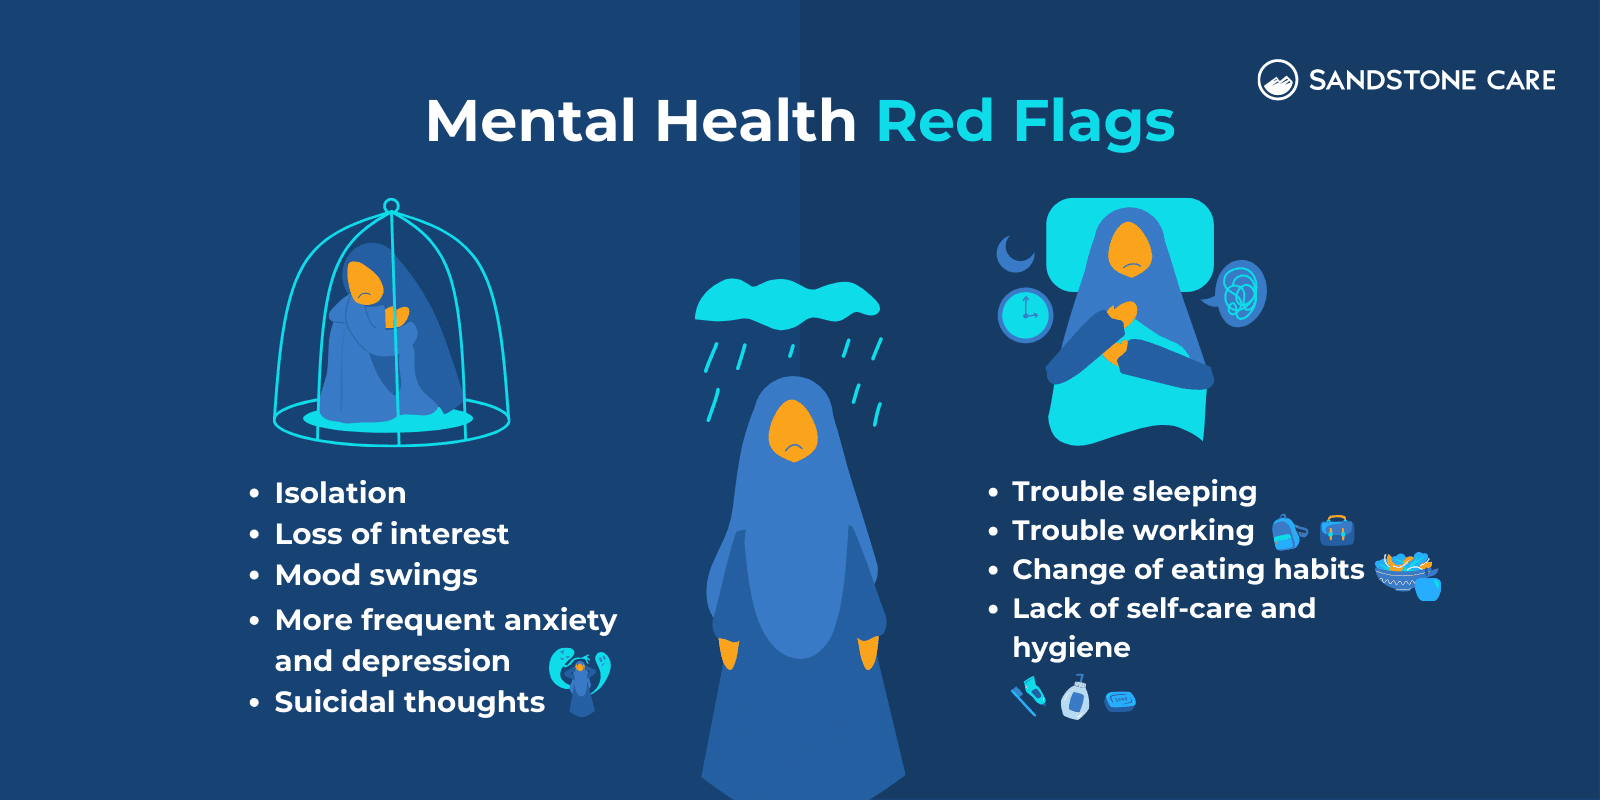 Mental Health Red Flags are illustrated with relevant digital illustrations categorized into 2: 1) different mental health states and 2) life style changes